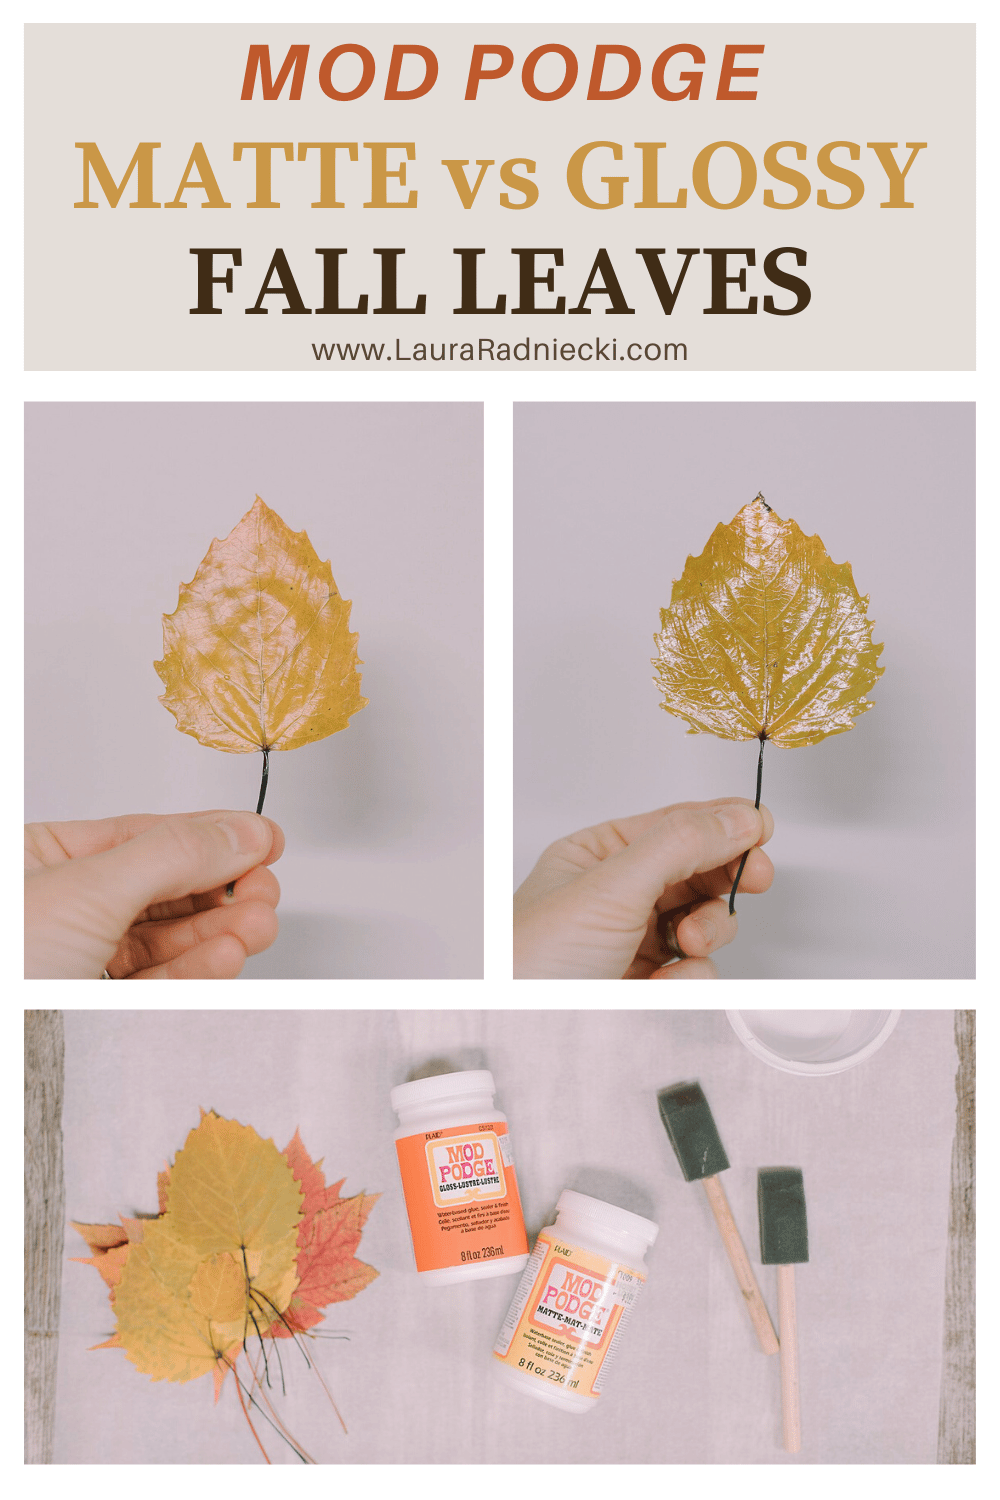 A Look at Matte vs Gloss Mod Podge Fall Leaves